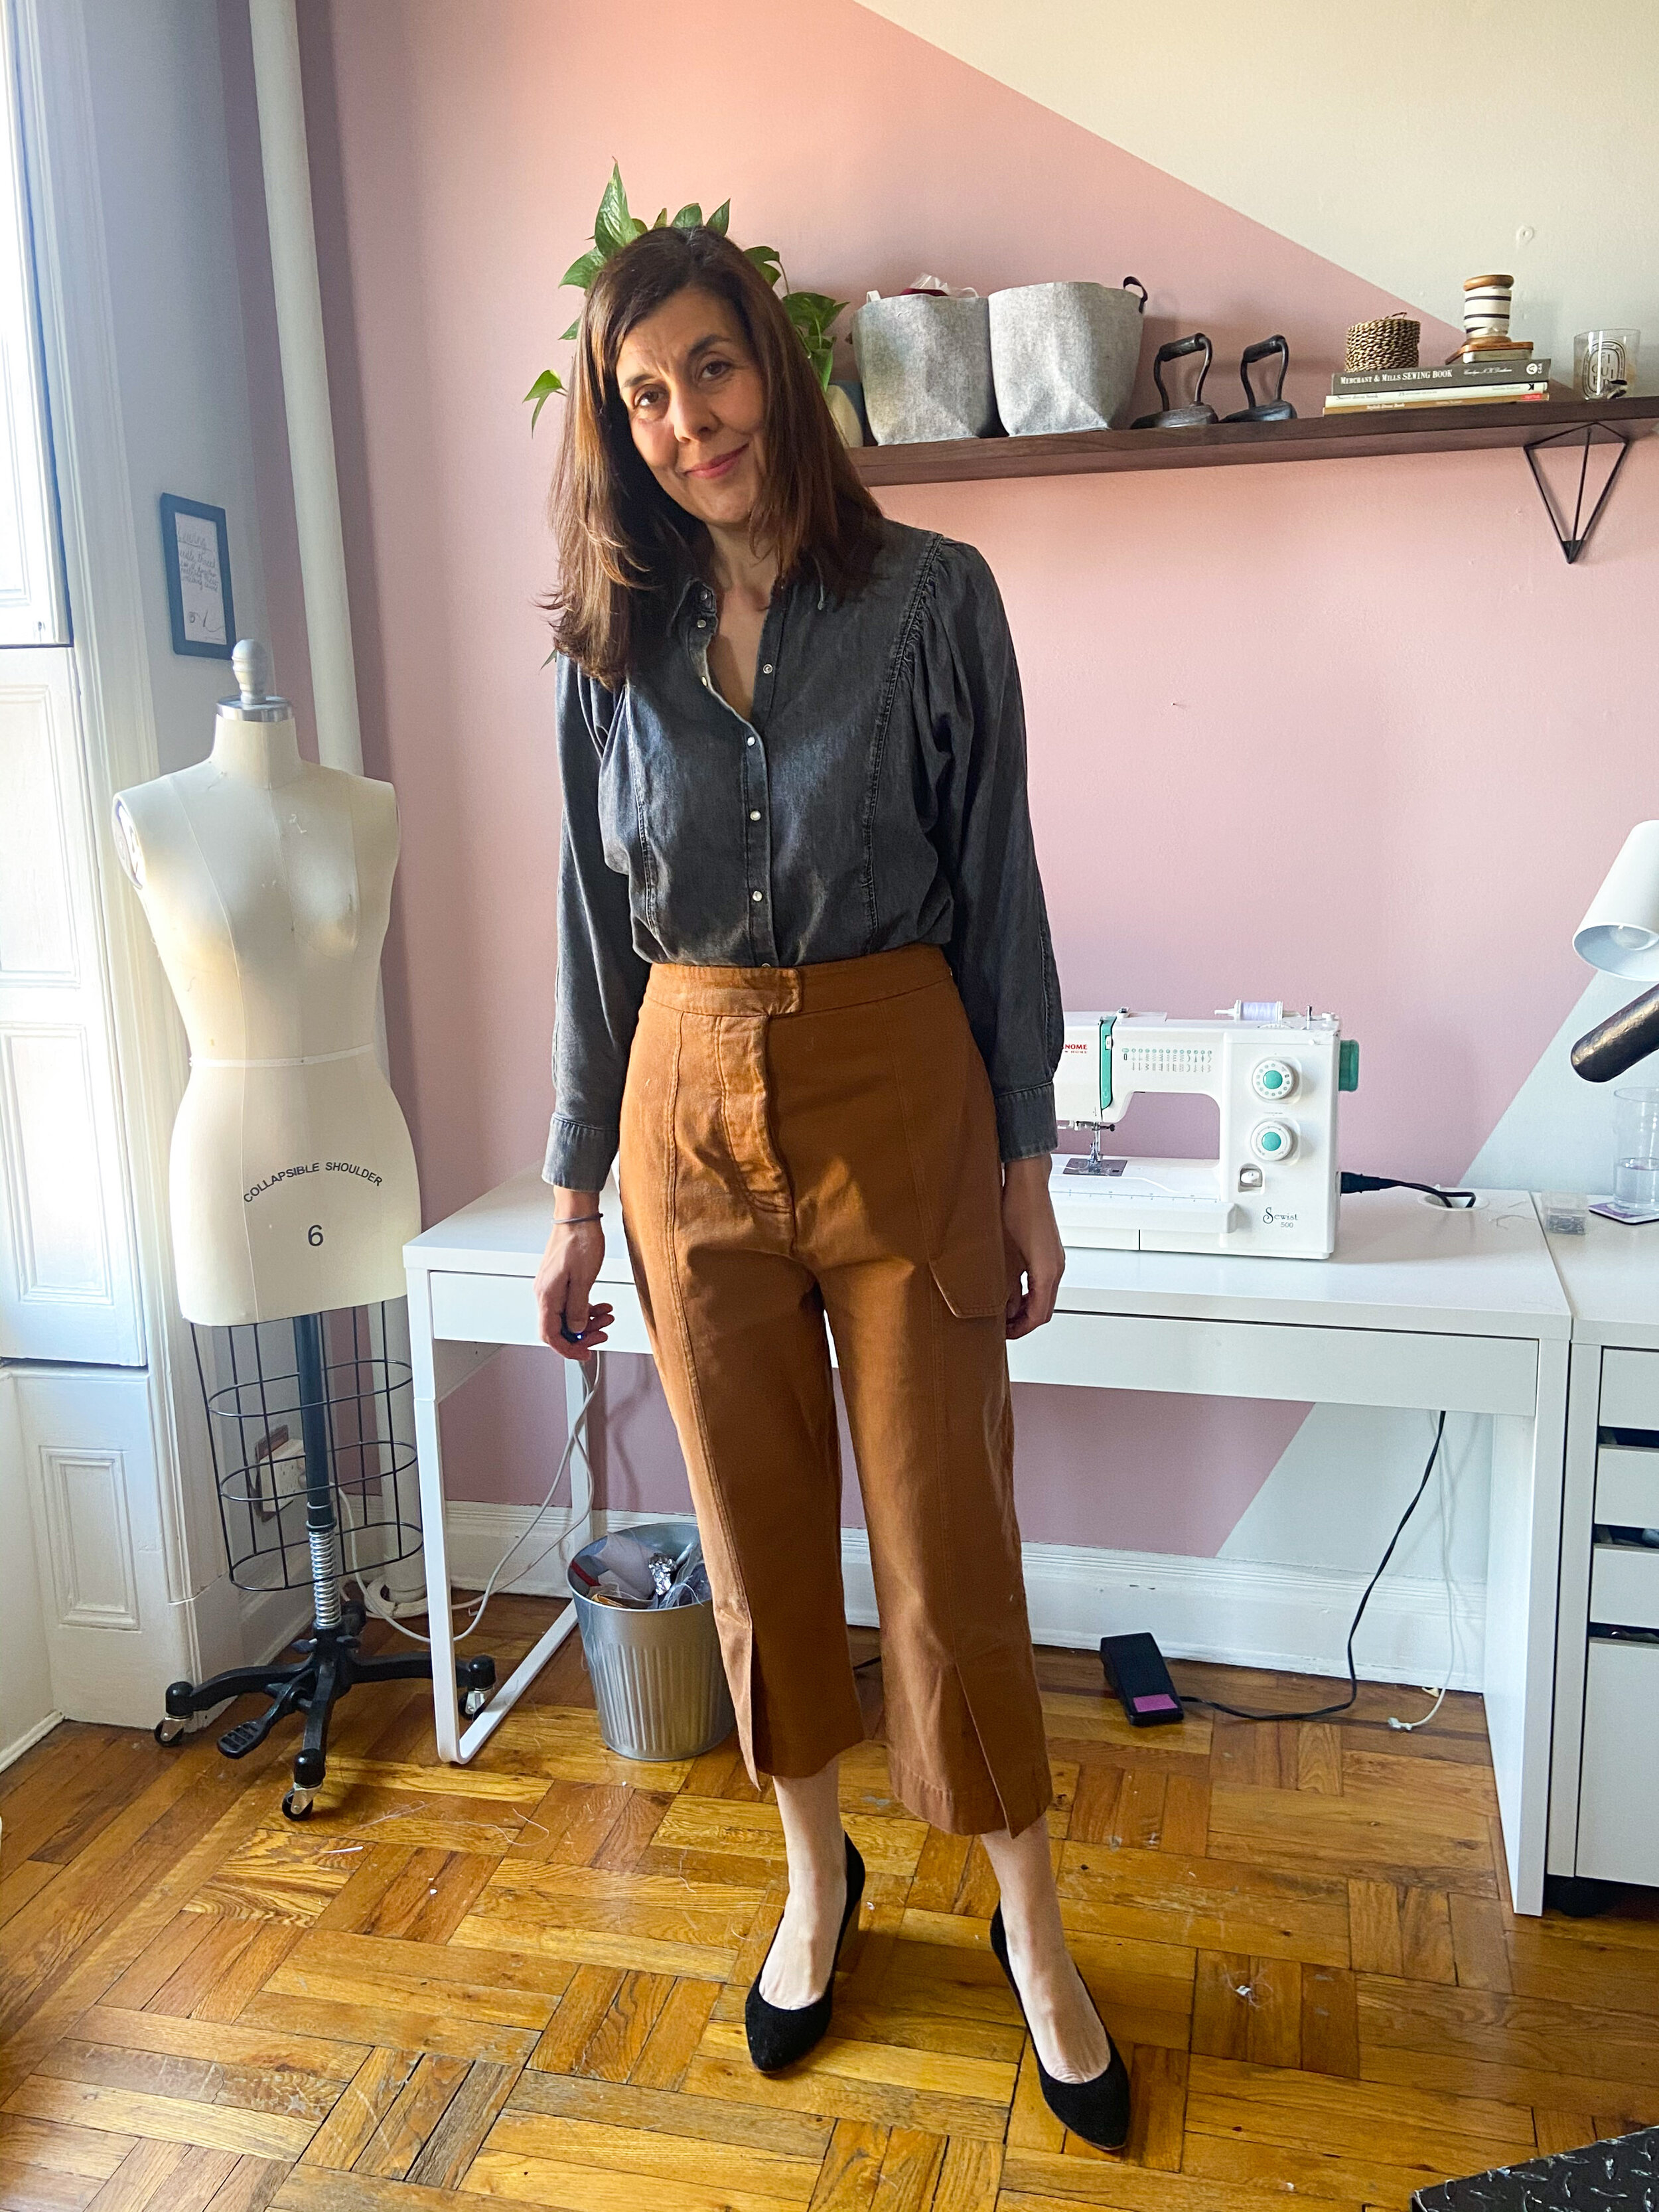 My favourite trouser patterns — Noble & Daughter